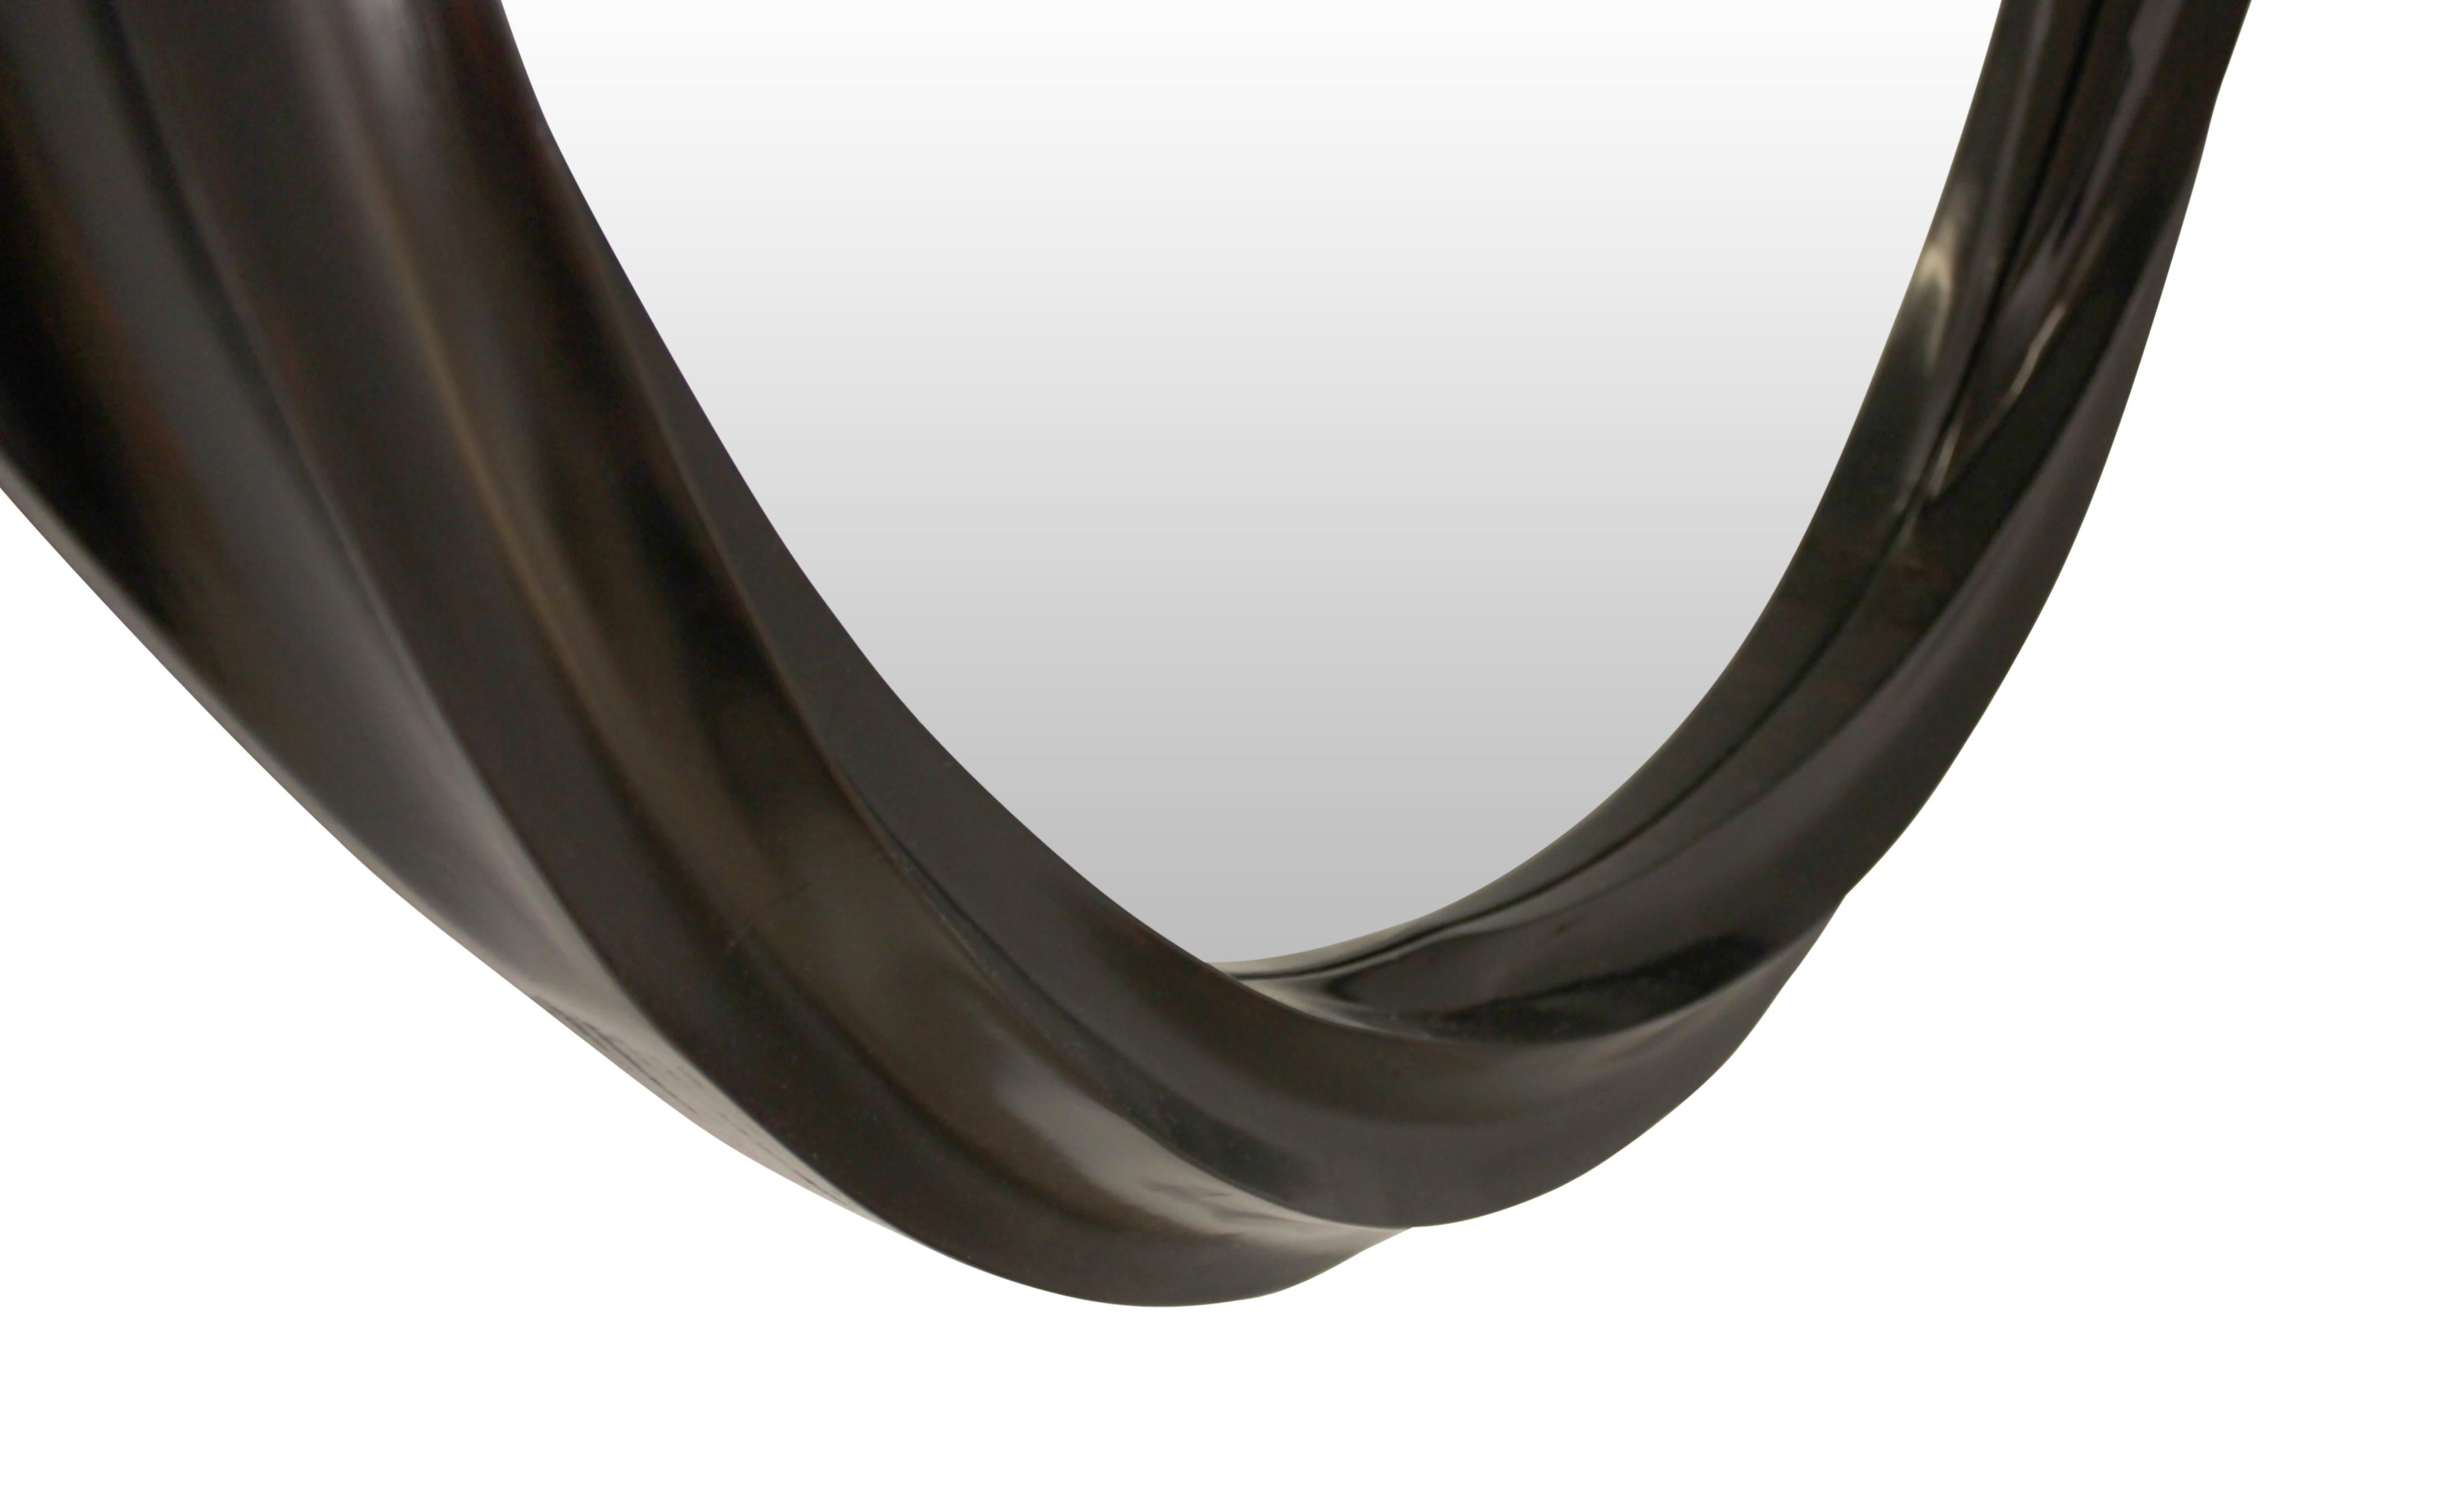 Wave series sculptural spiral wall mirror is presented with a sculptural colixoid frame consisting of 6 interpolated spiral concave surfaces, influenced by works of Moebius. Hard maple frame is stained and toned to a warm dark brown shade with satin